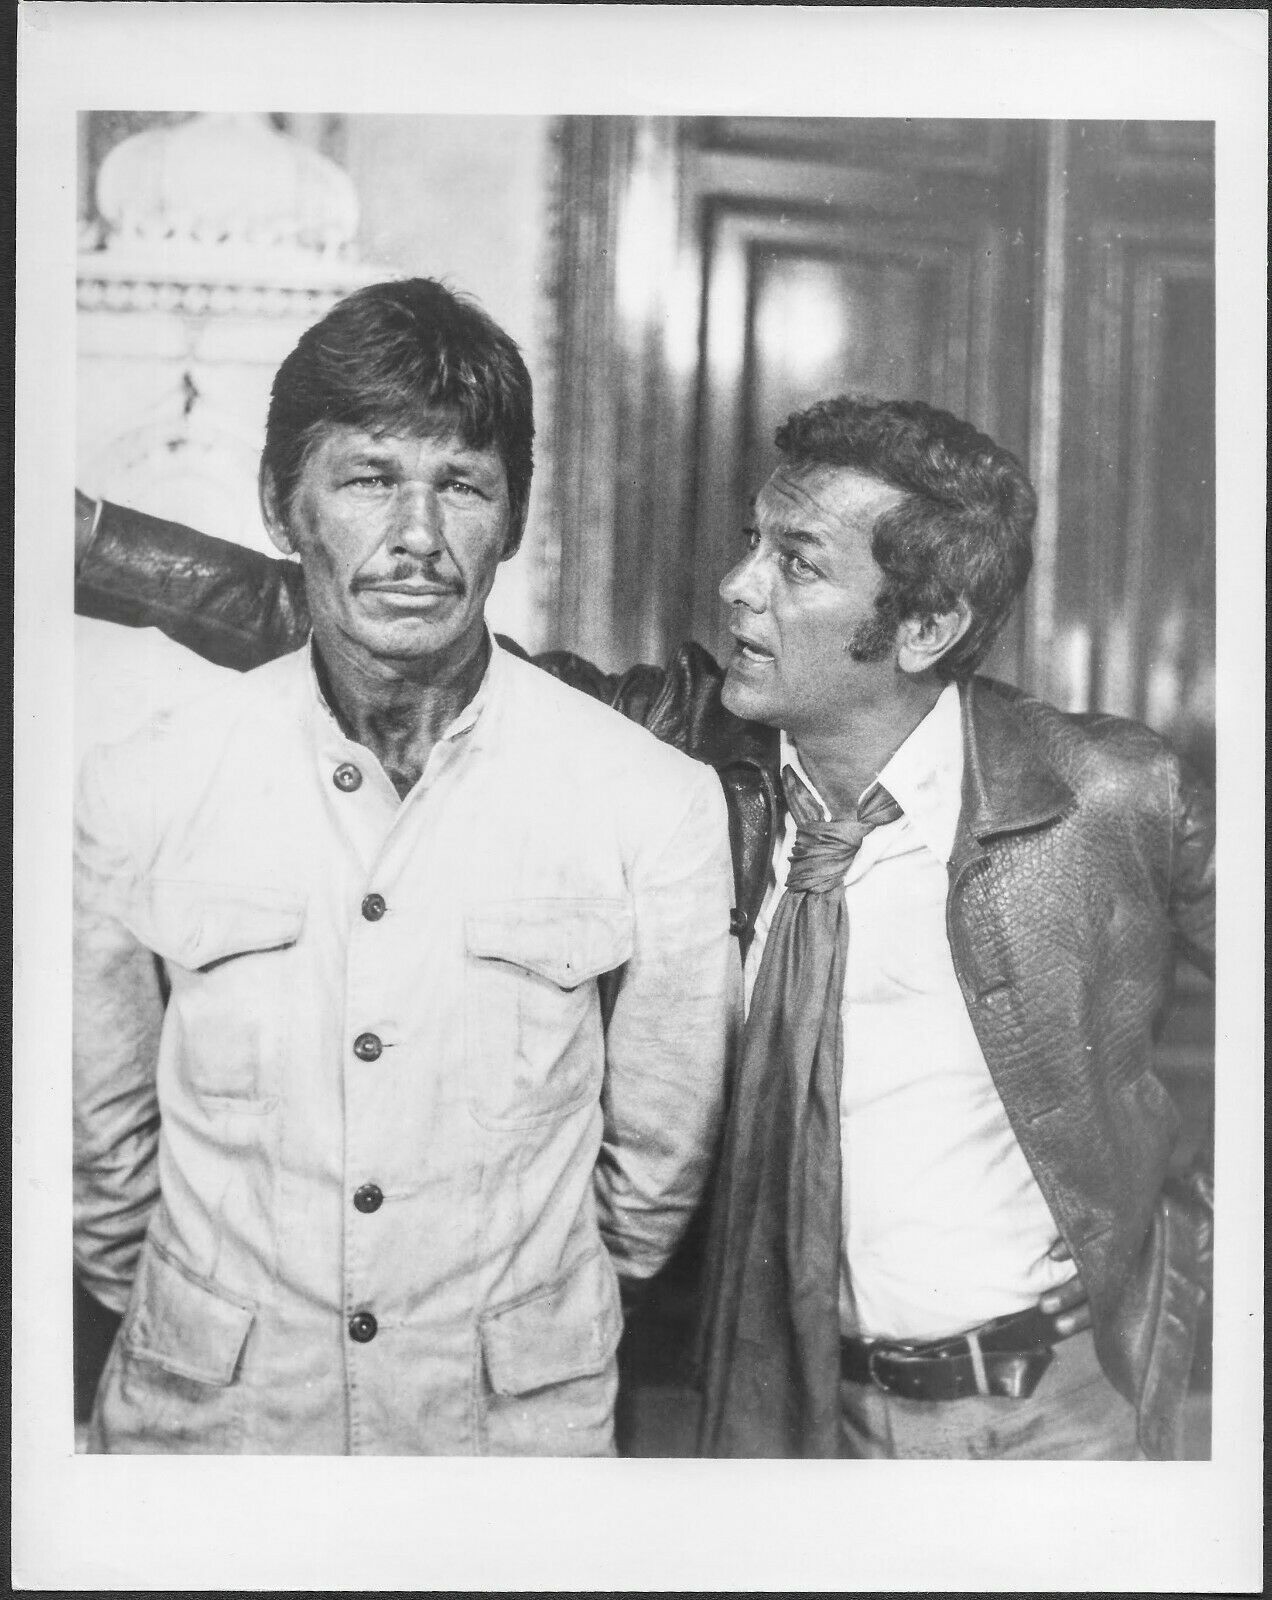 ~ Charles Bronson Tony Curtis Original 1974 TV Photo You Can't Win Them All